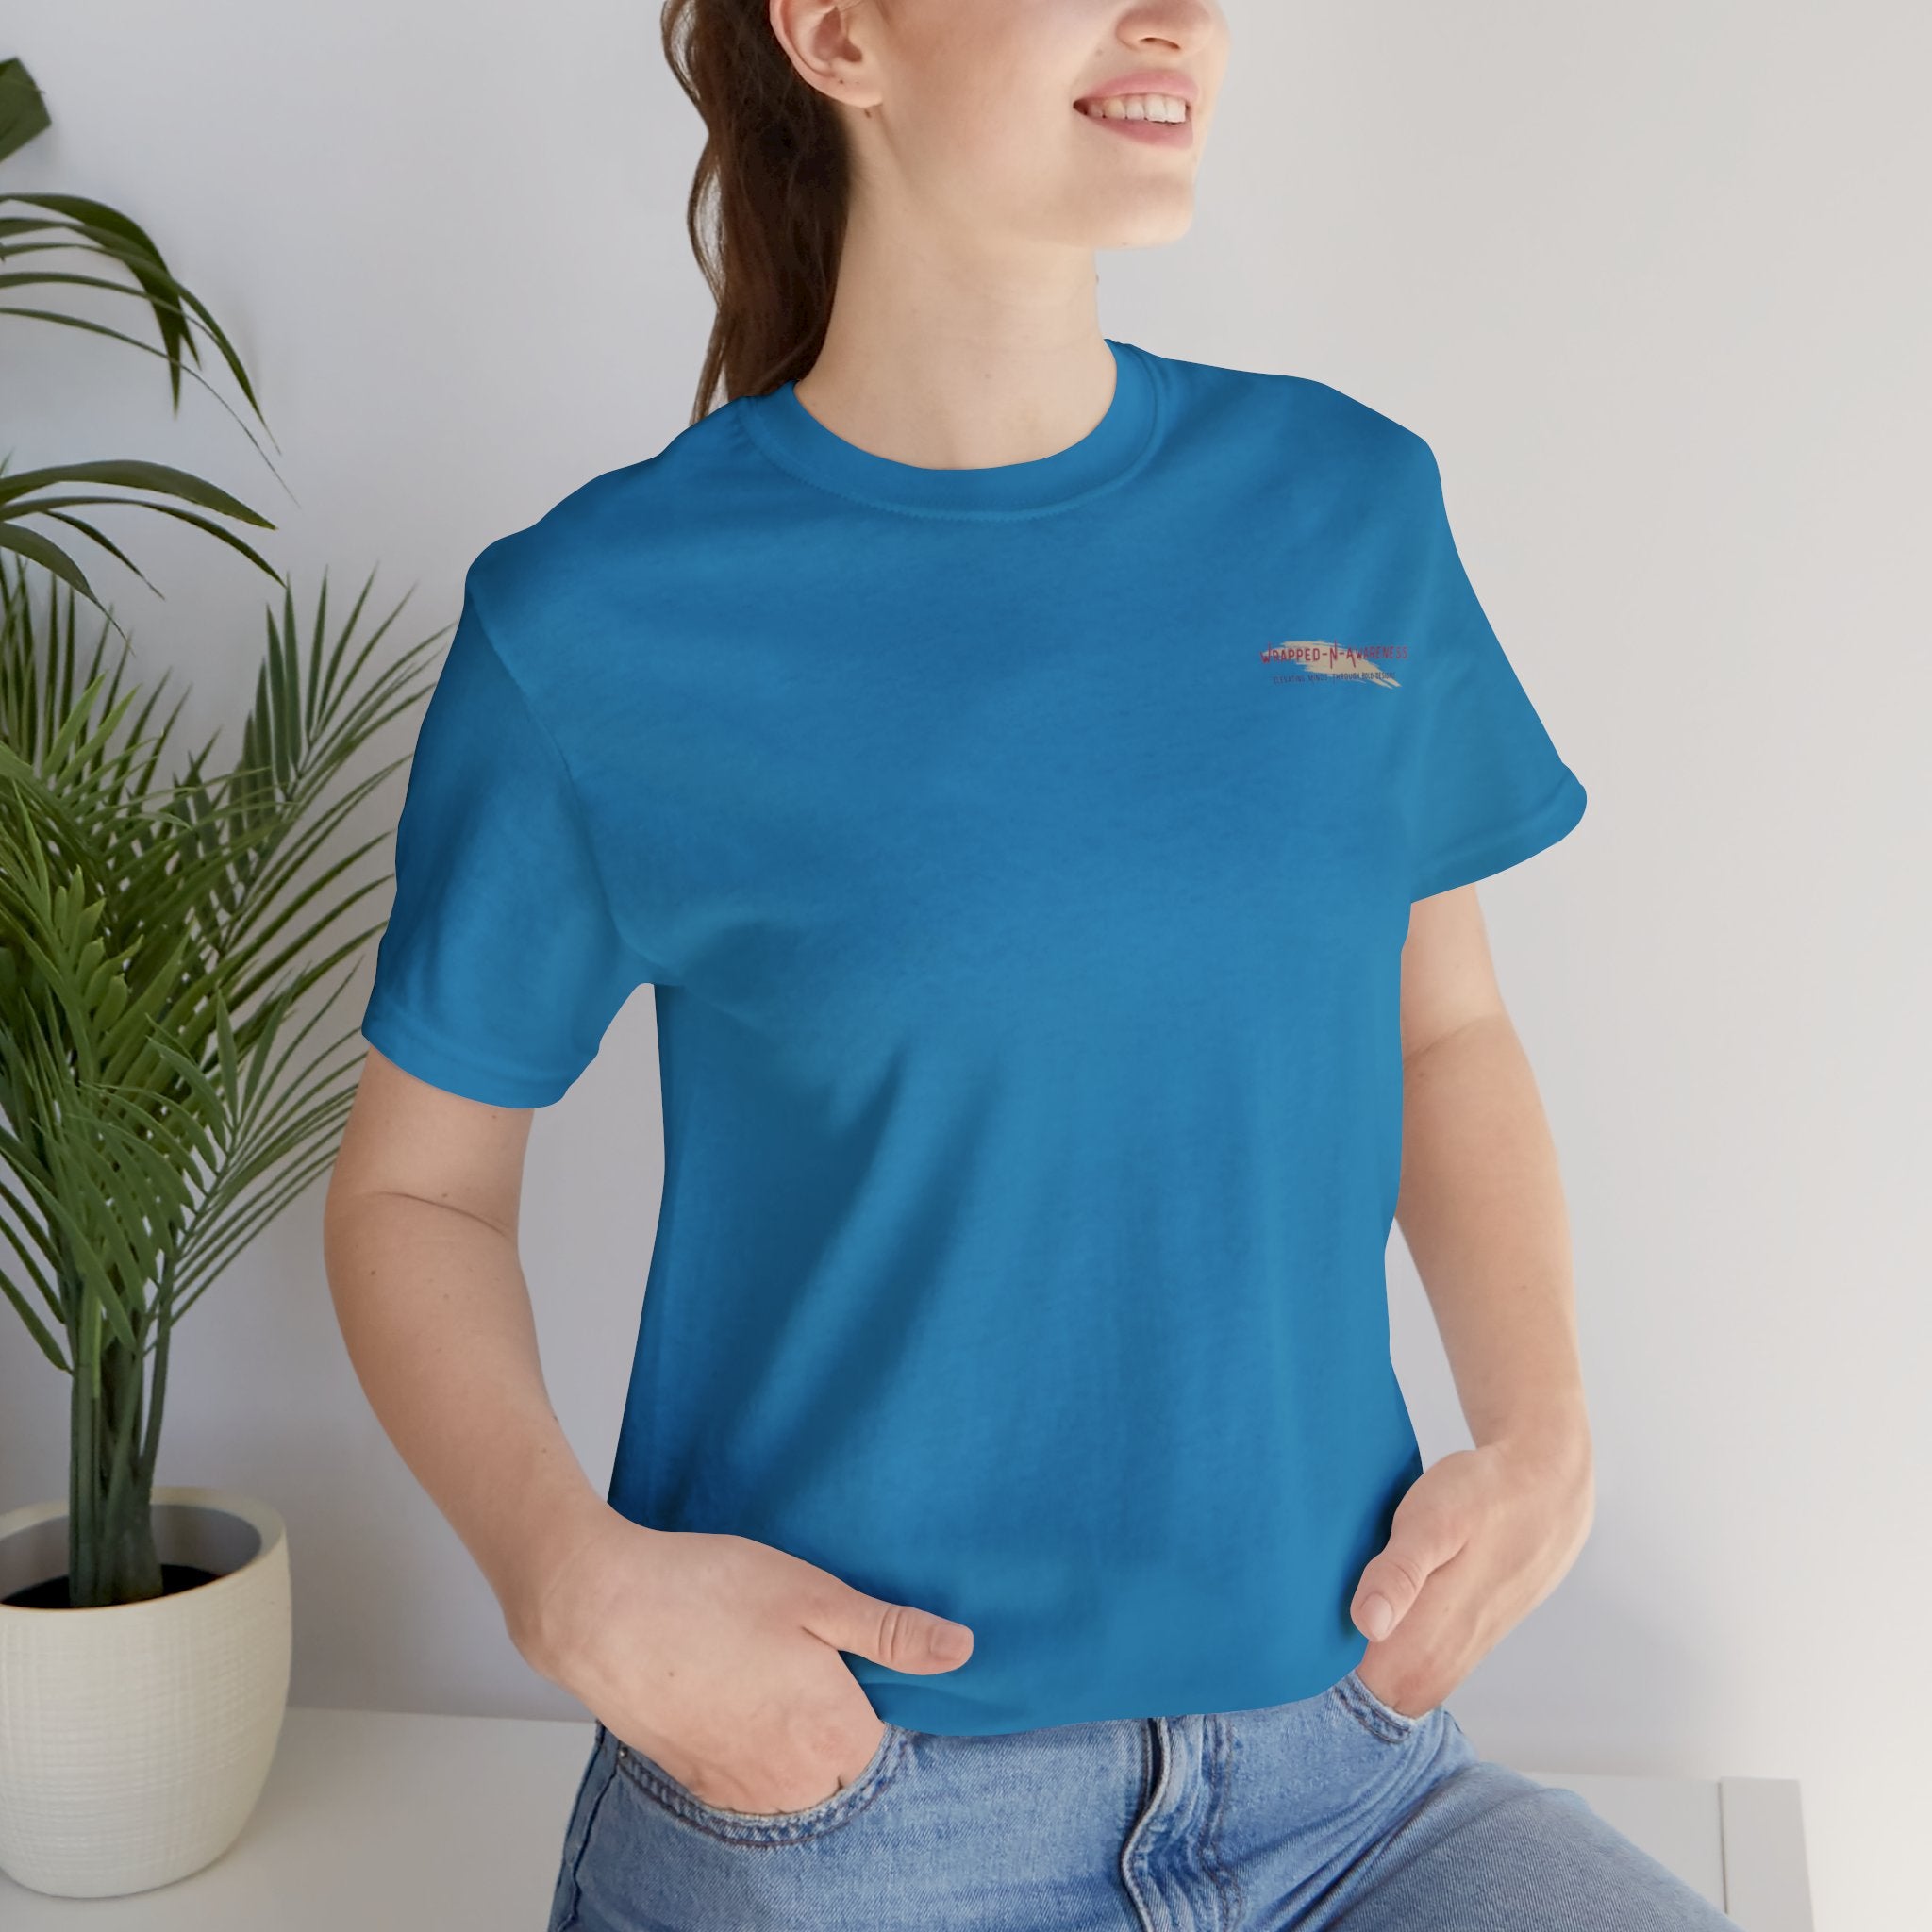 Mindfulness Heals Wounds Tee - Bella+Canvas 3001 Turquoise Airlume Cotton Bella+Canvas 3001 Crew Neckline Jersey Short Sleeve Lightweight Fabric Mental Health Support Retail Fit Tear-away Label Tee Unisex Tee T-Shirt 4577918391545651438_2048 Printify